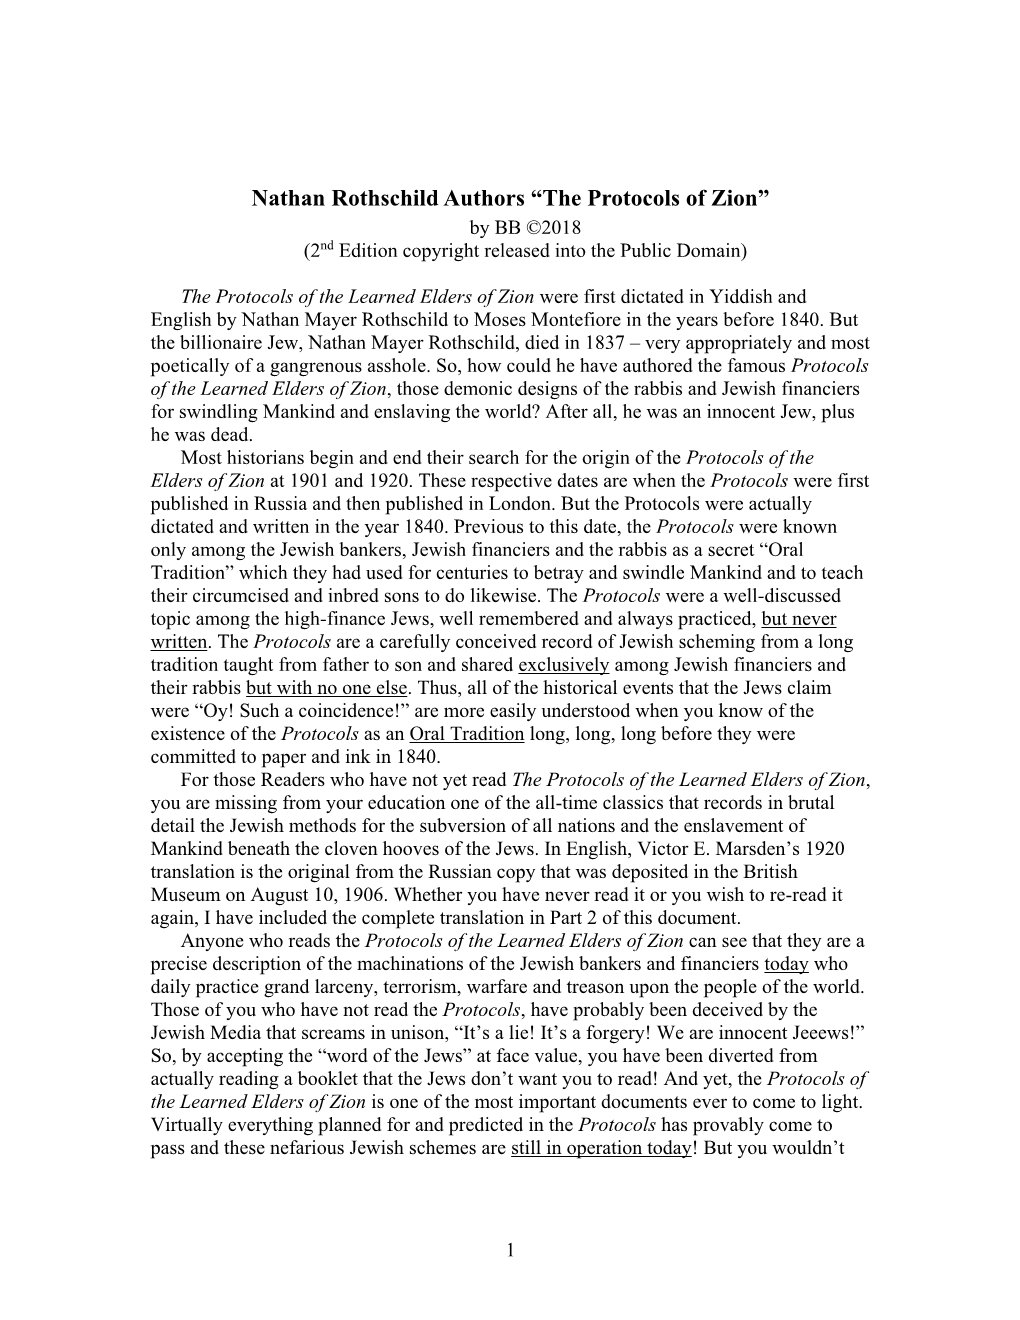 Nathan Rothschild Authors the Protocols of Zion